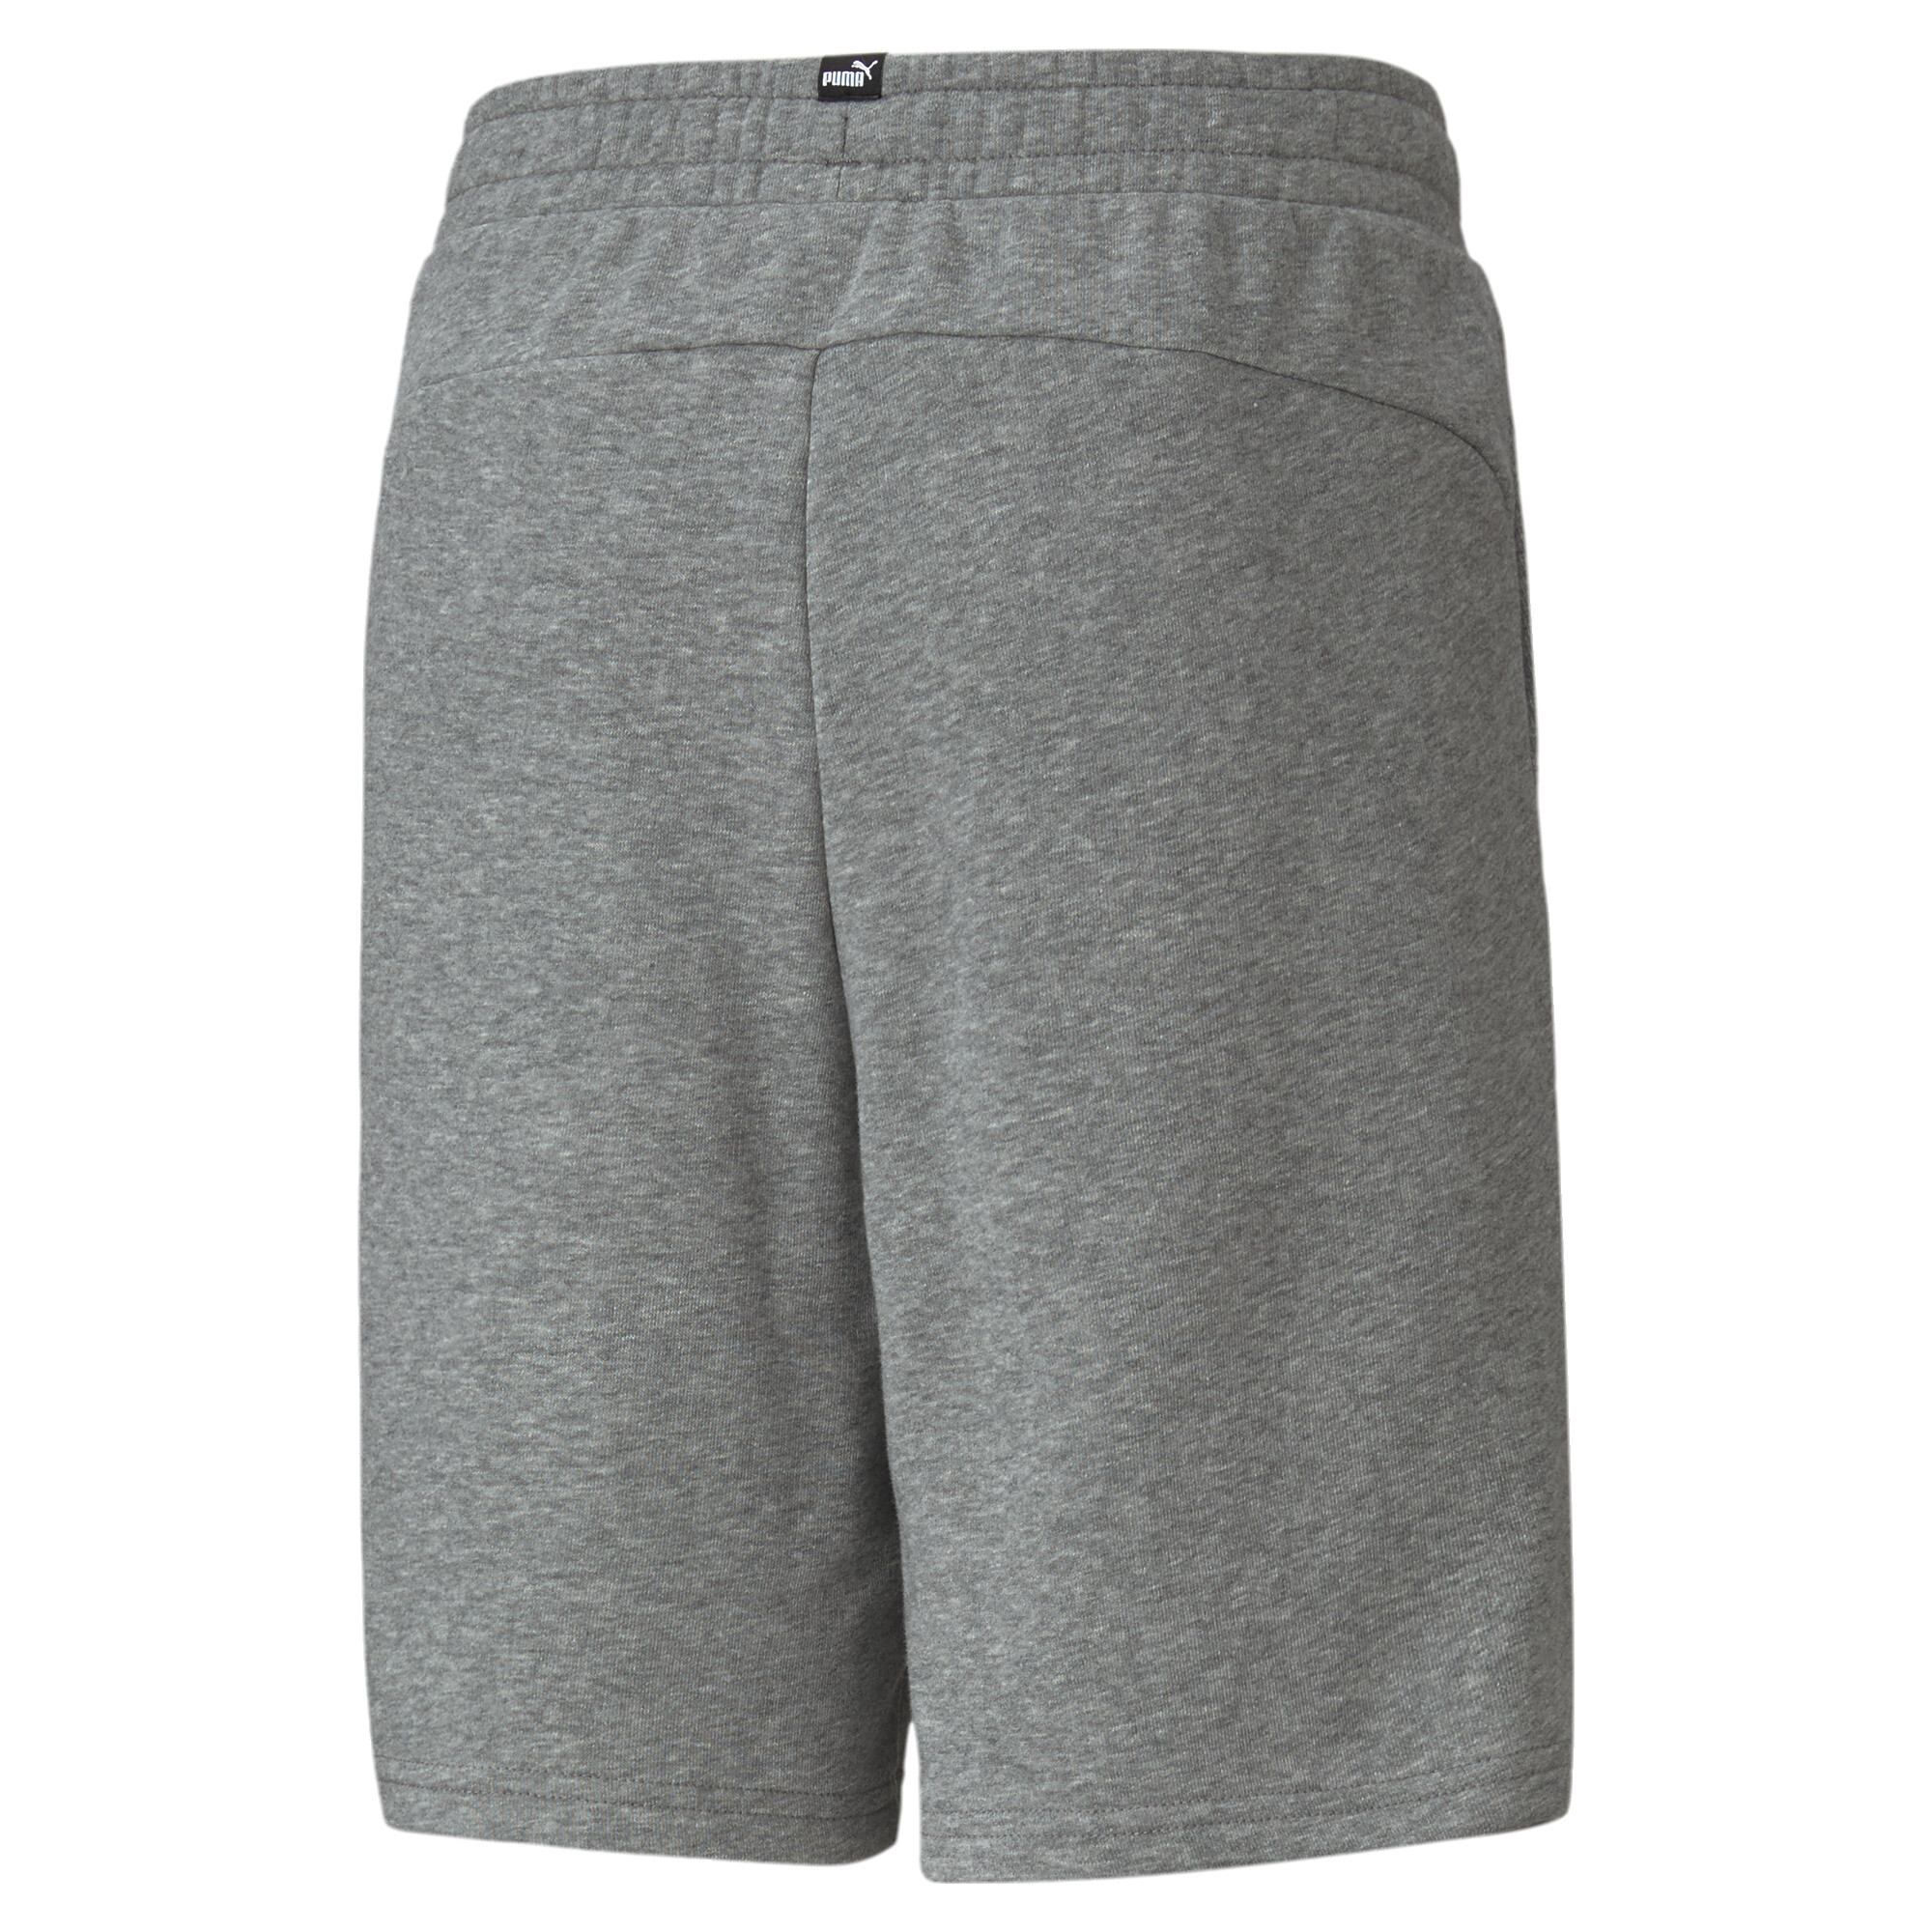 PUMA Essentials Sweat Shorts In Heather, Size 13-14 Youth